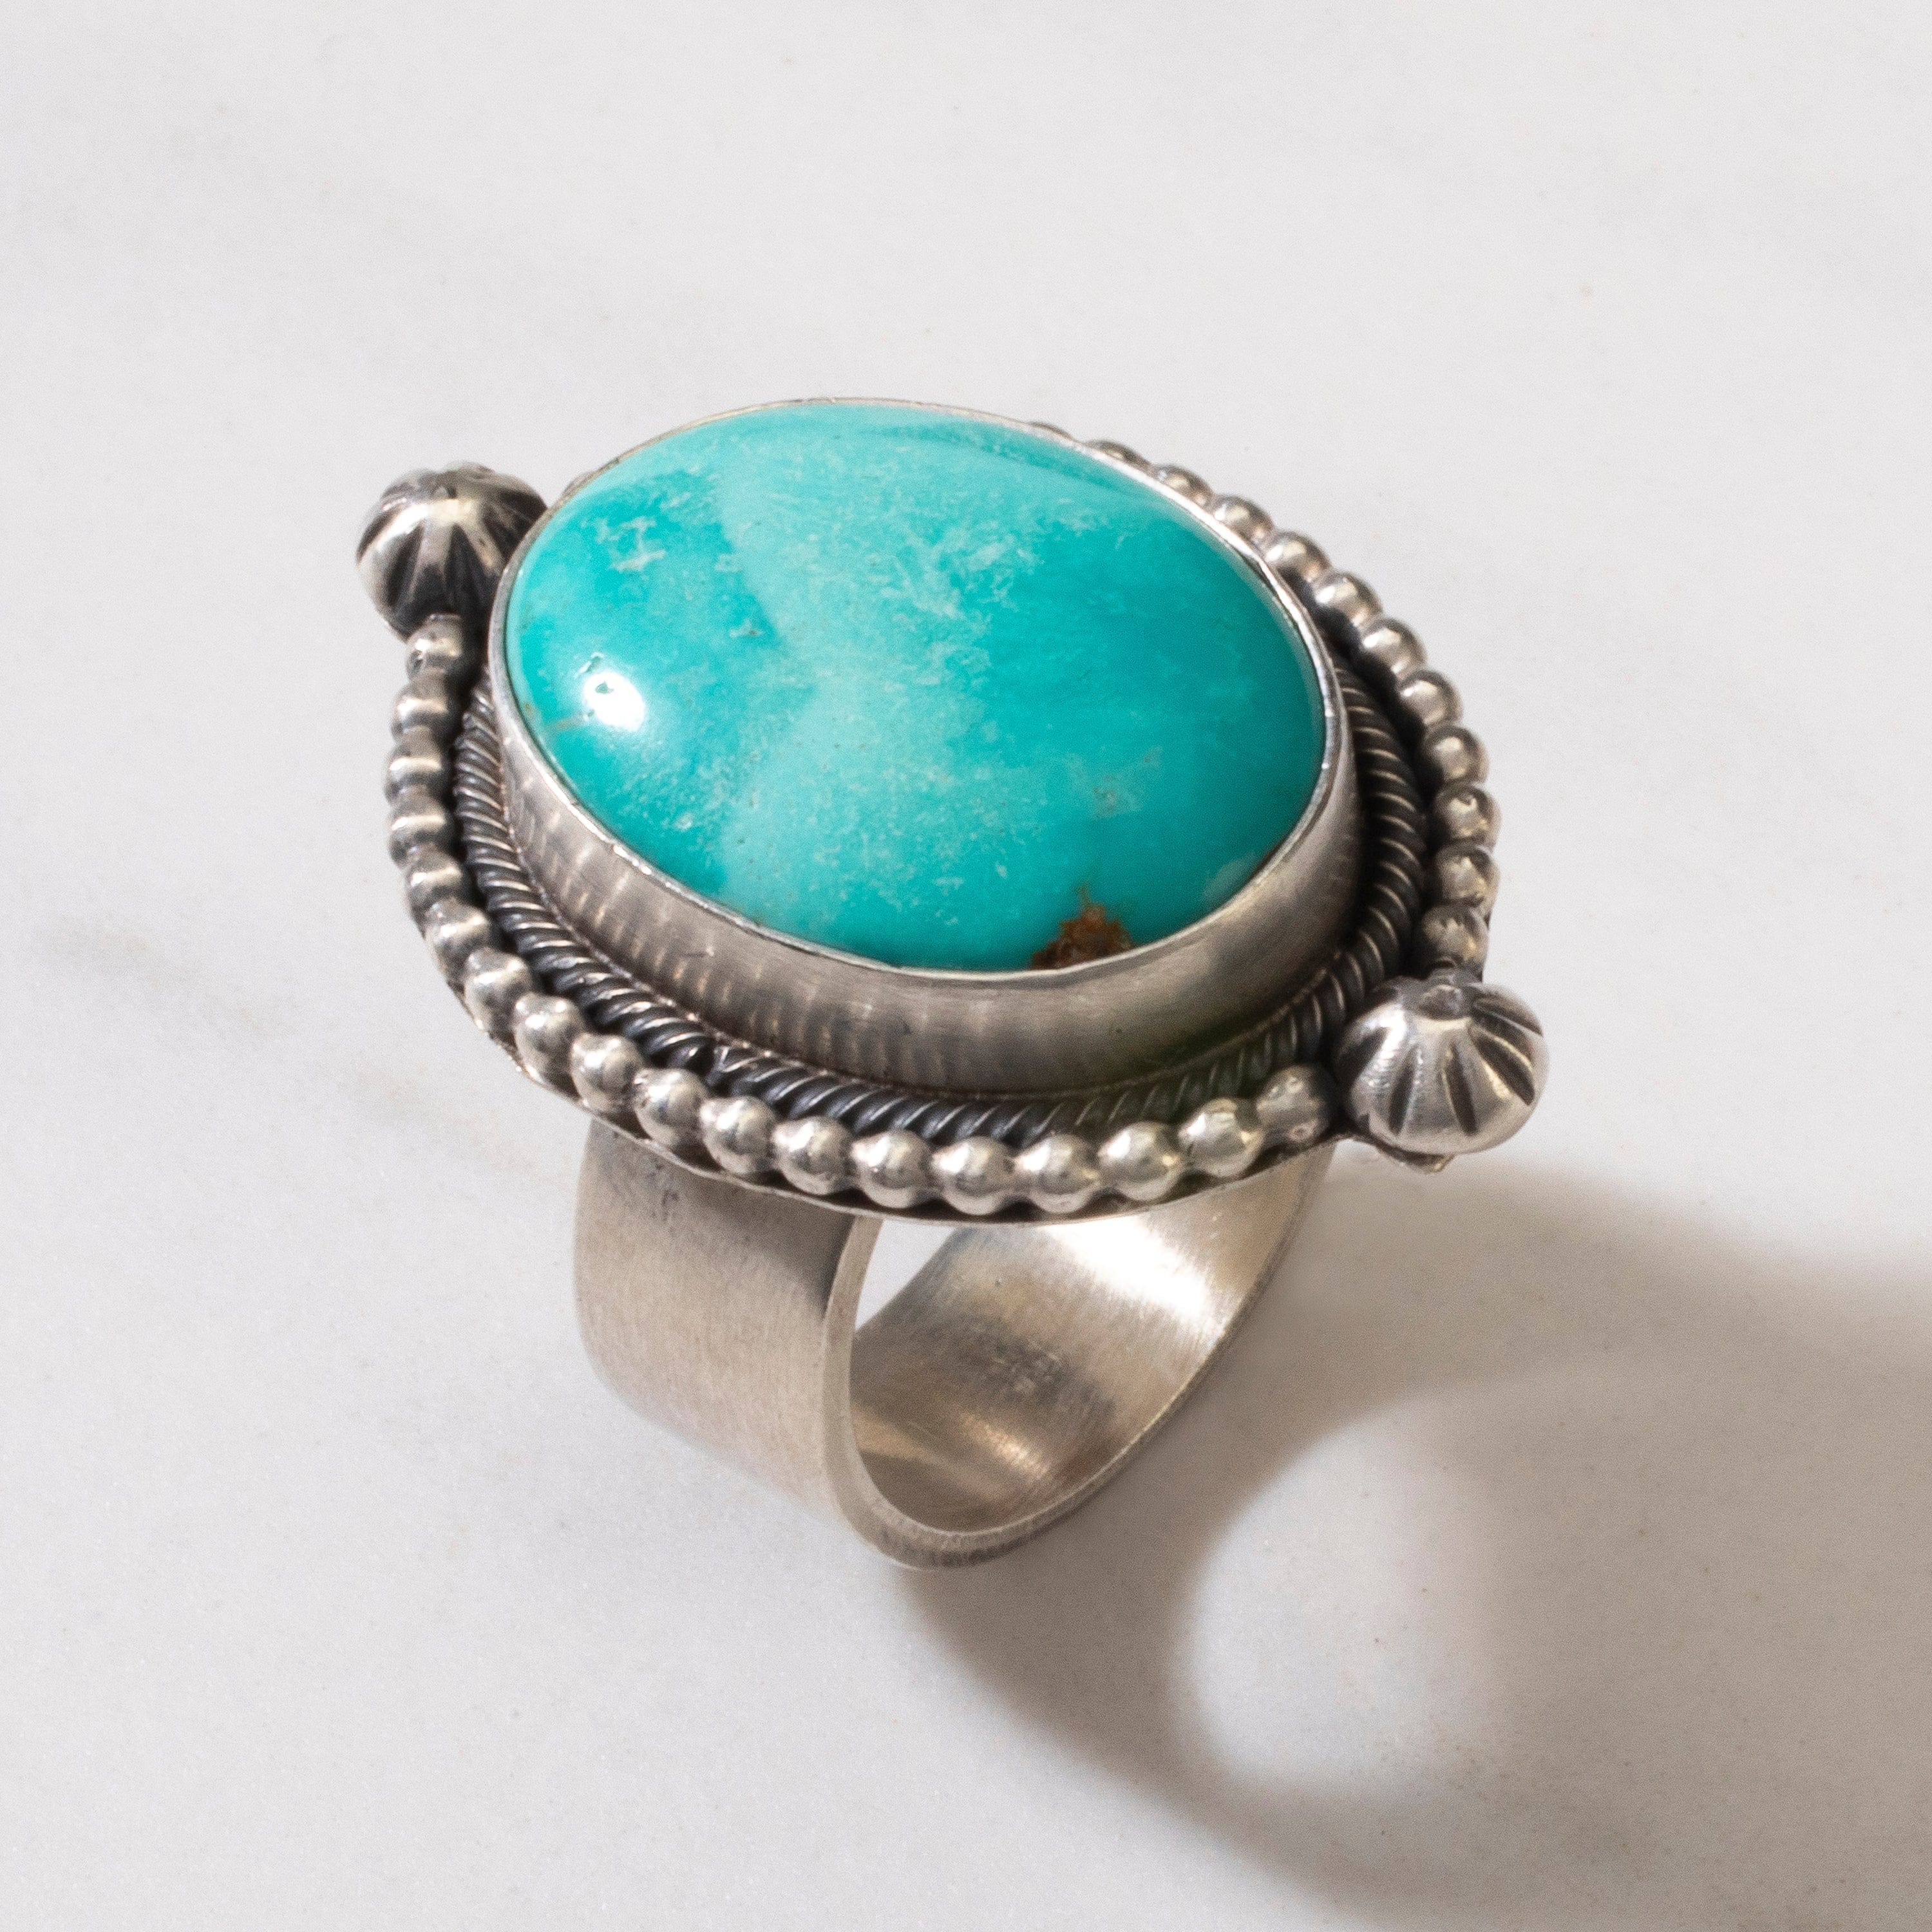 Kalifano Native American Jewelry 7 Scott Skeets Royston Turquoise Navajo USA Native American Made 925 Sterling Silver Ring NAR900.034.7